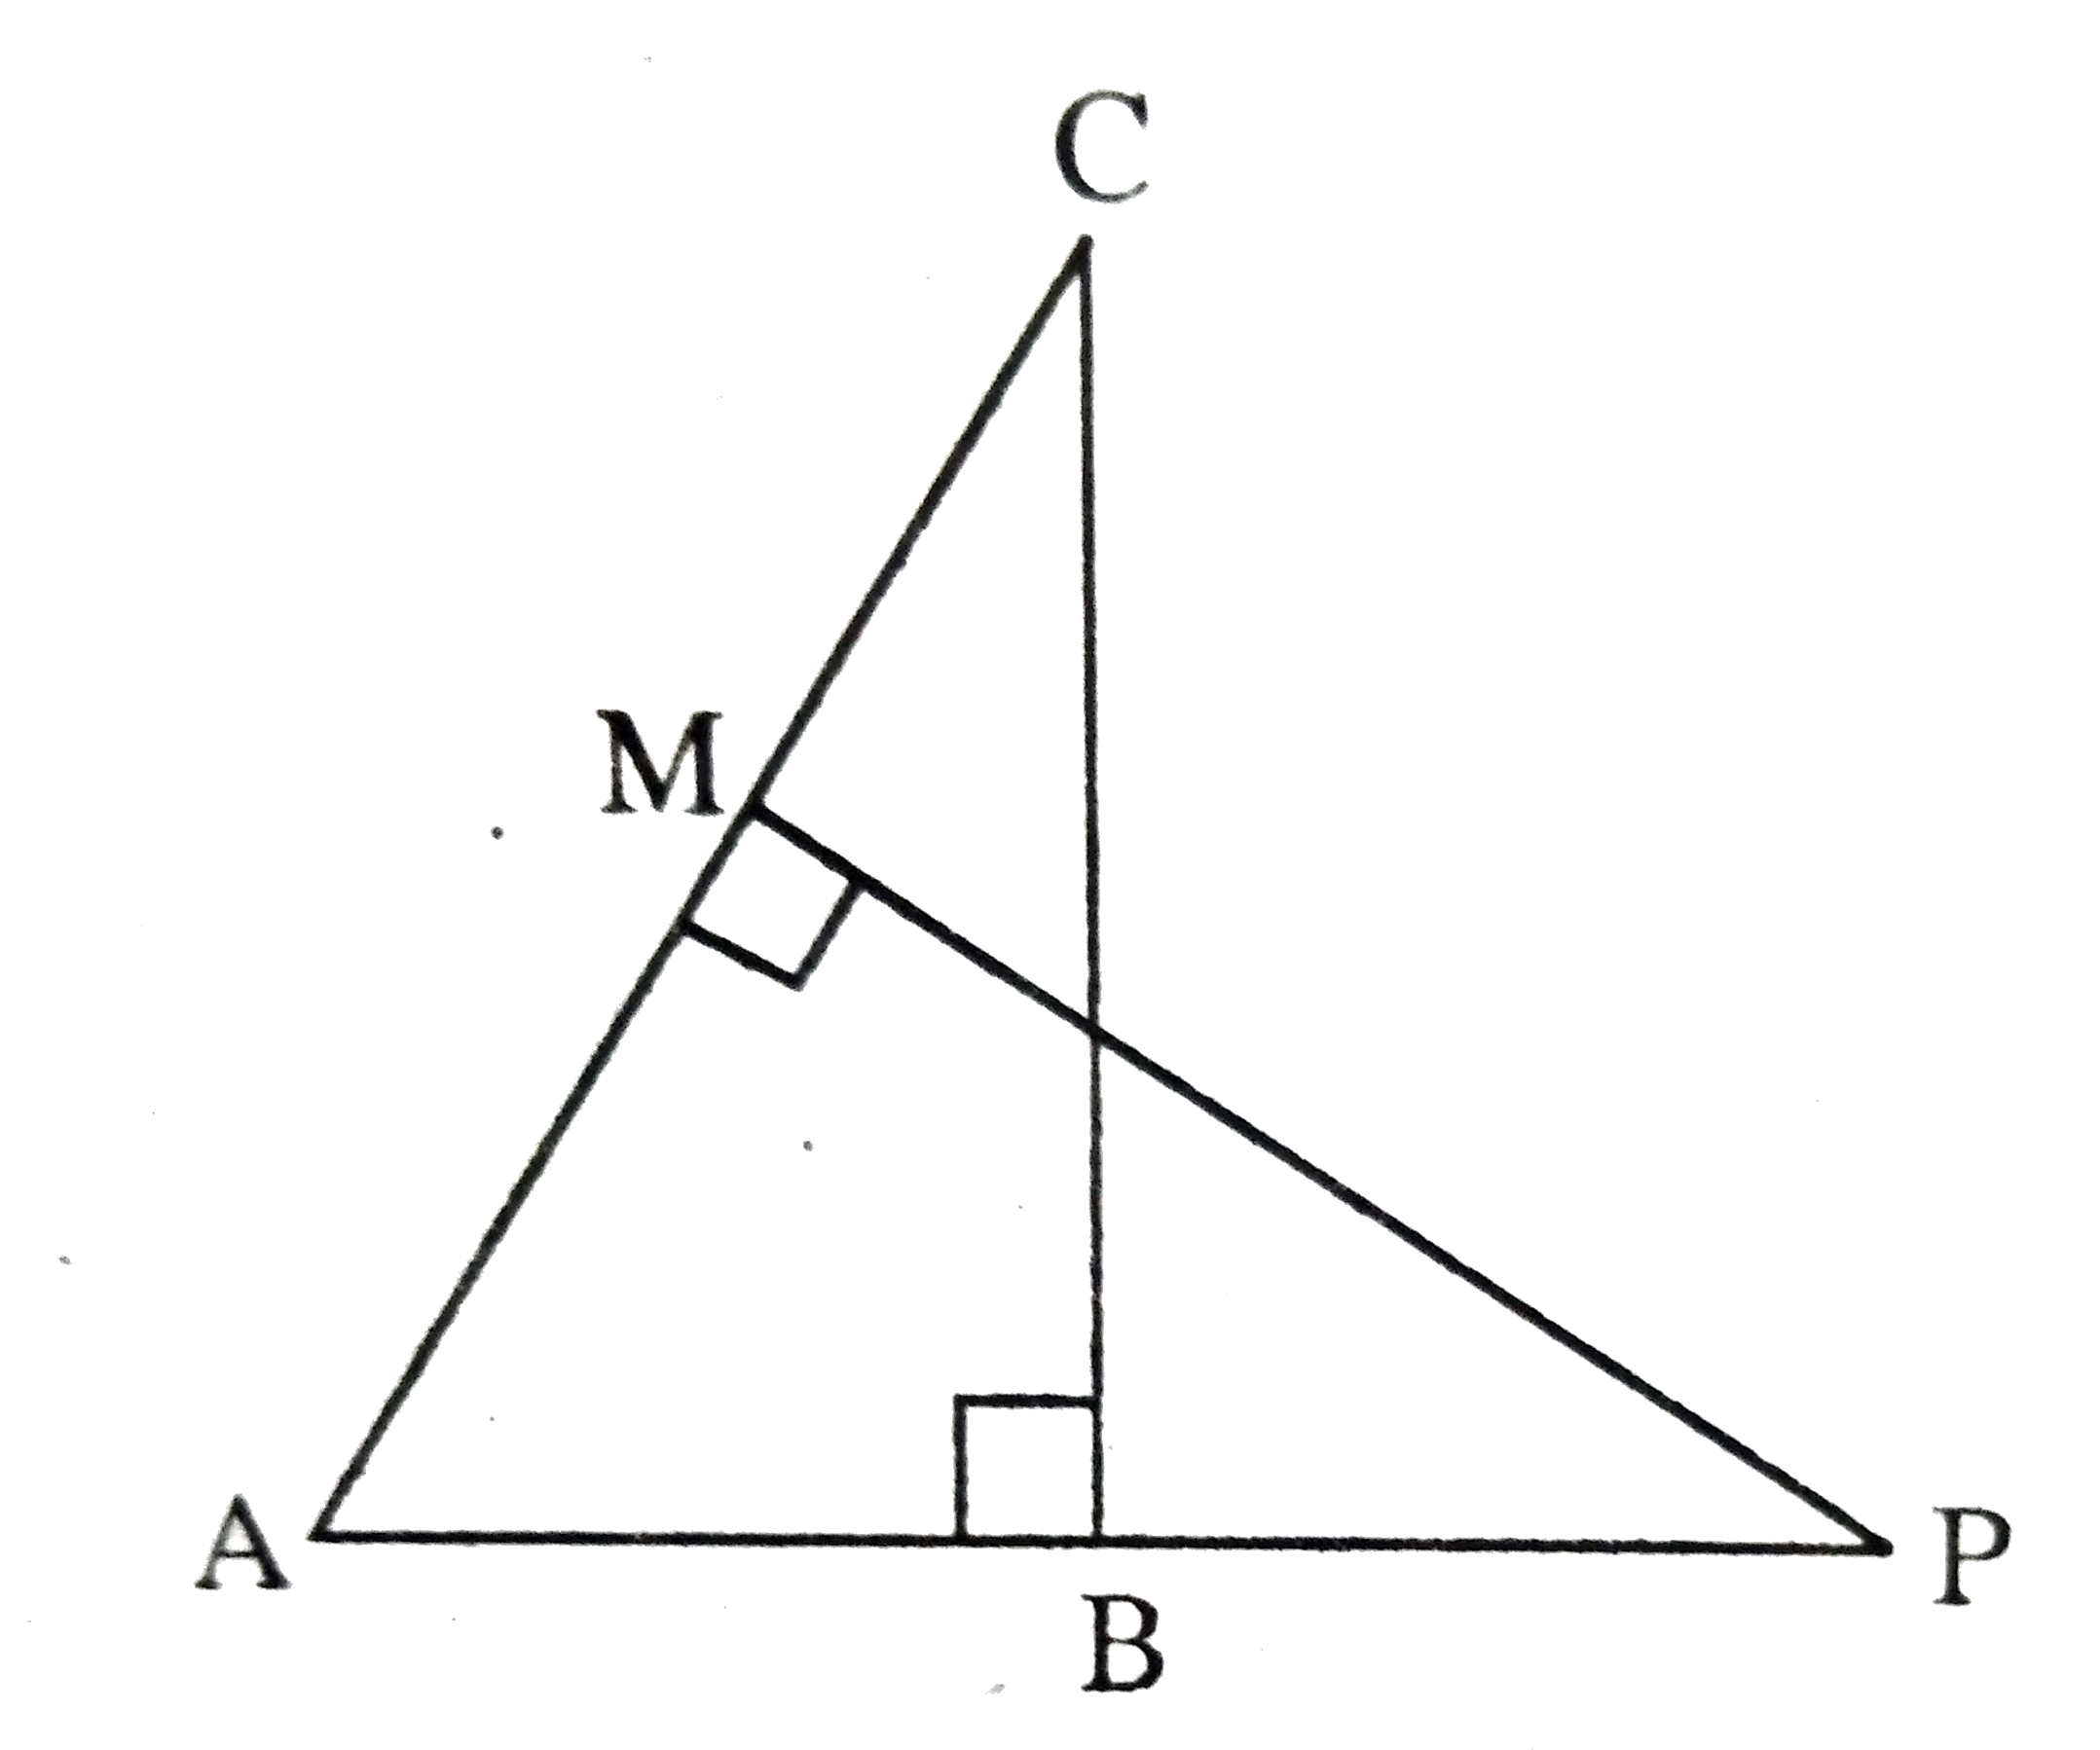 In the adjoining figure , /B and /M of the right angled triangles DeltaABC and DeltaAMP are right angles. Prove that (a) DeltaABC~DeltaAMP, (b) (CA)/(PA)=(BC)/(MP).